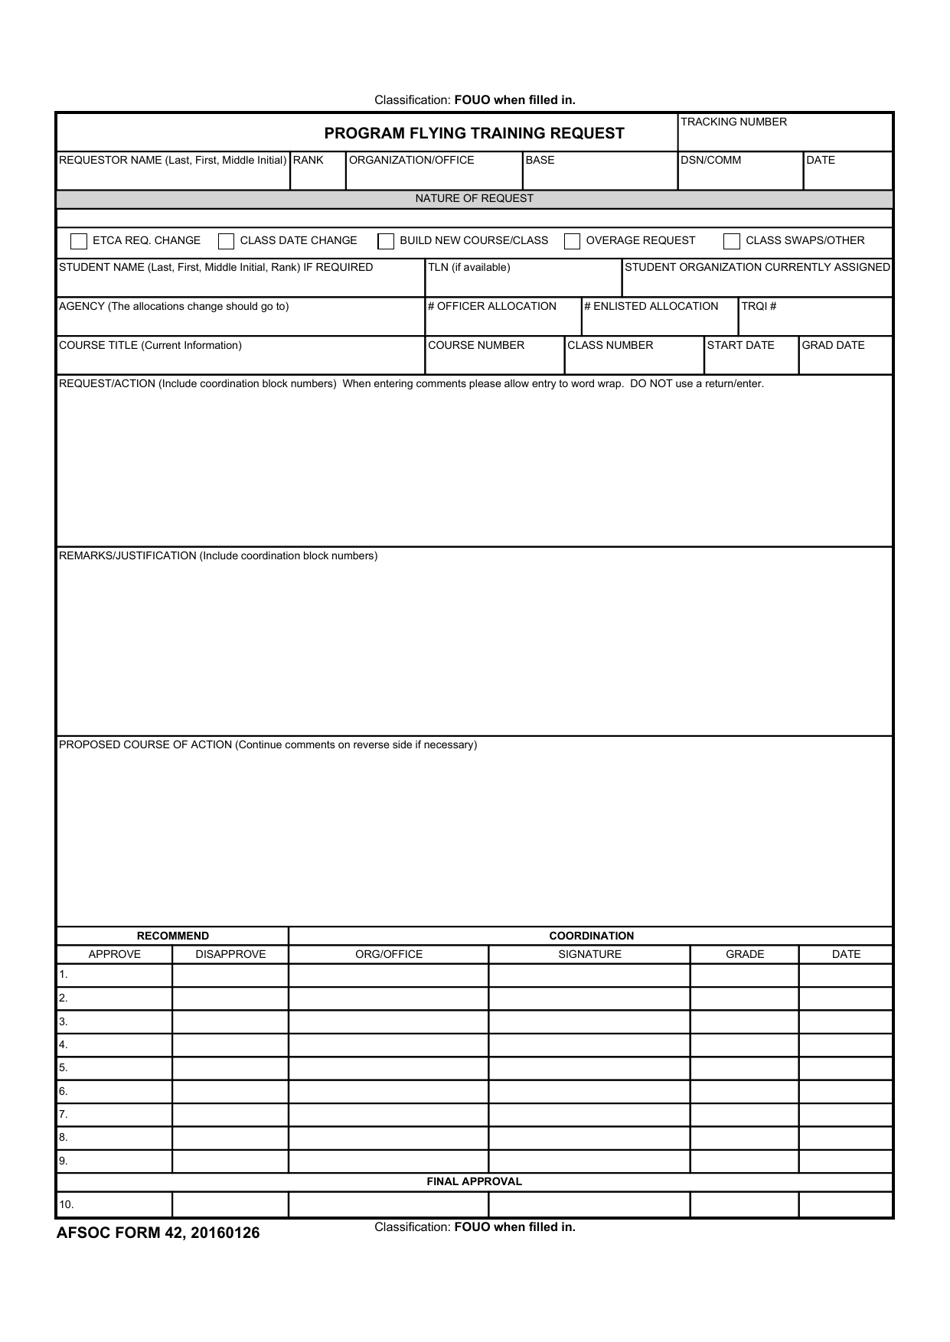 AFSOC Form 42 Program Flying Training Request, Page 1